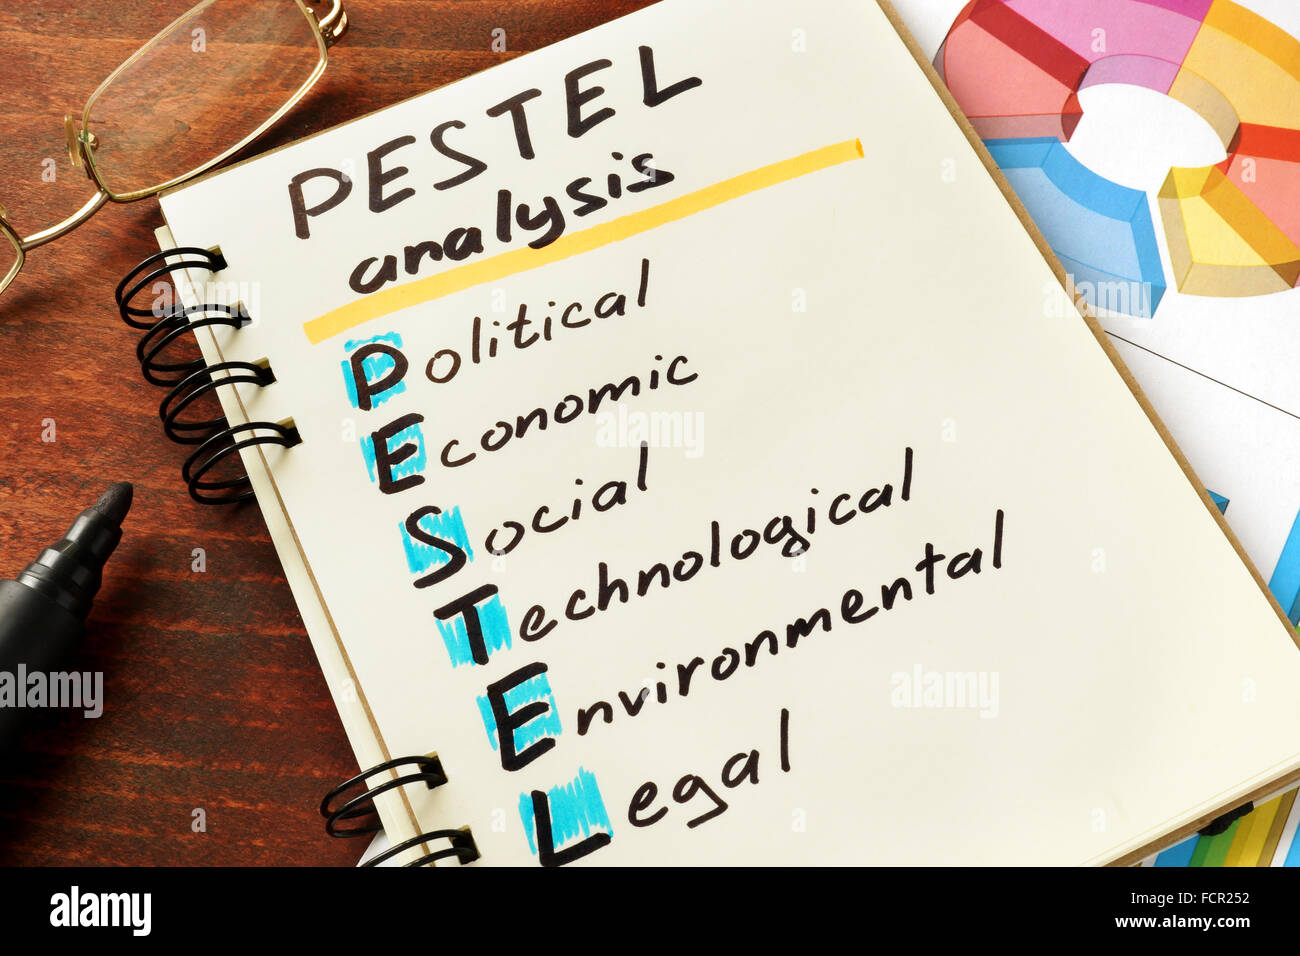 Notepad with pestel analysis on the wooden table. Stock Photo